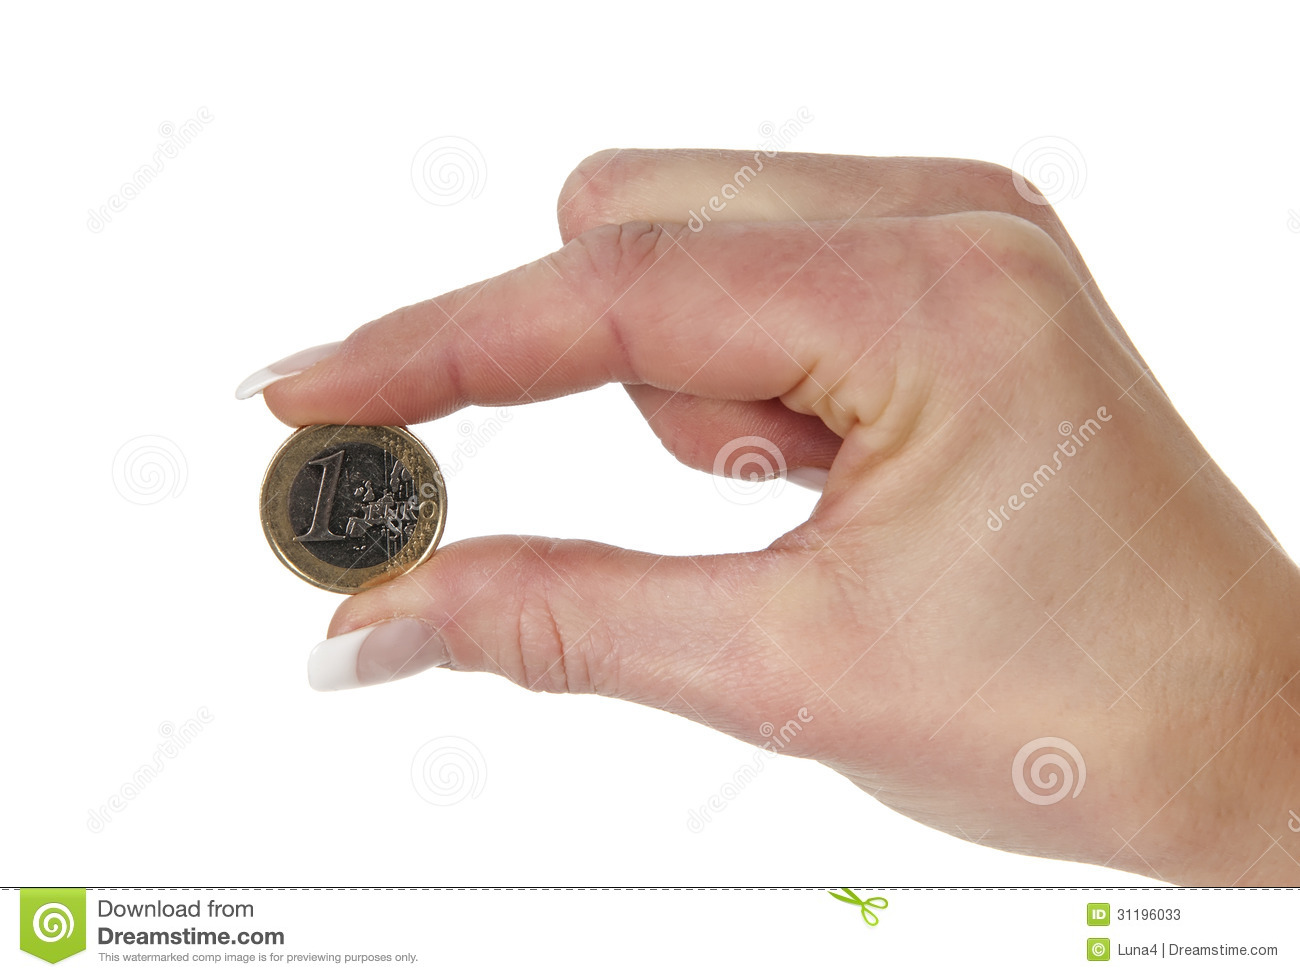 euro-coin-two-fingers-hand-holding-one-isolated-white-background-31196033.jpg